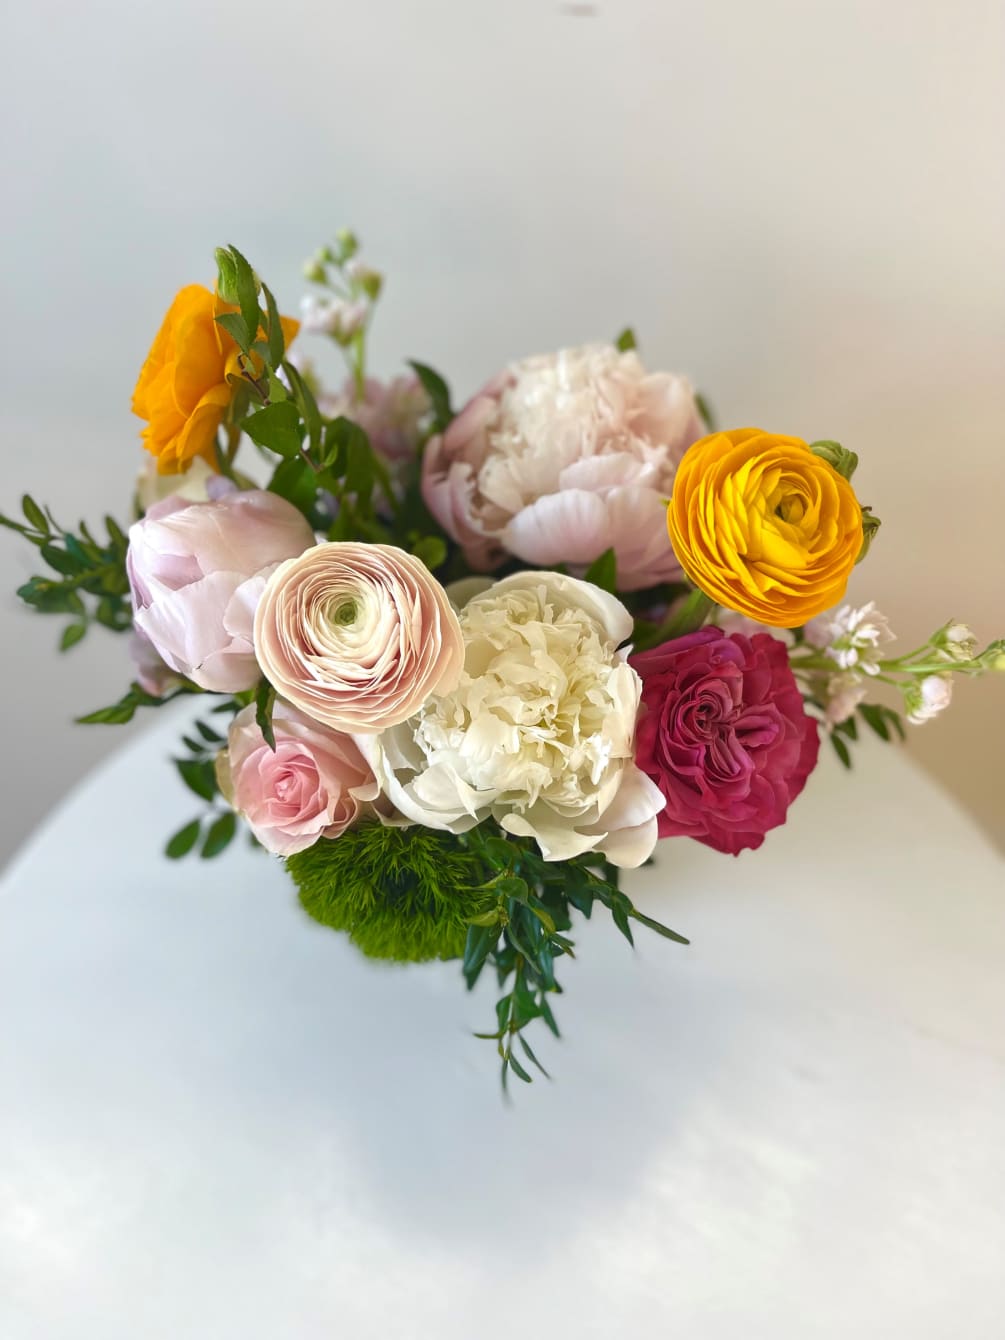 This perfect fishbowl filled with ranunculus, peonies and roses is a great